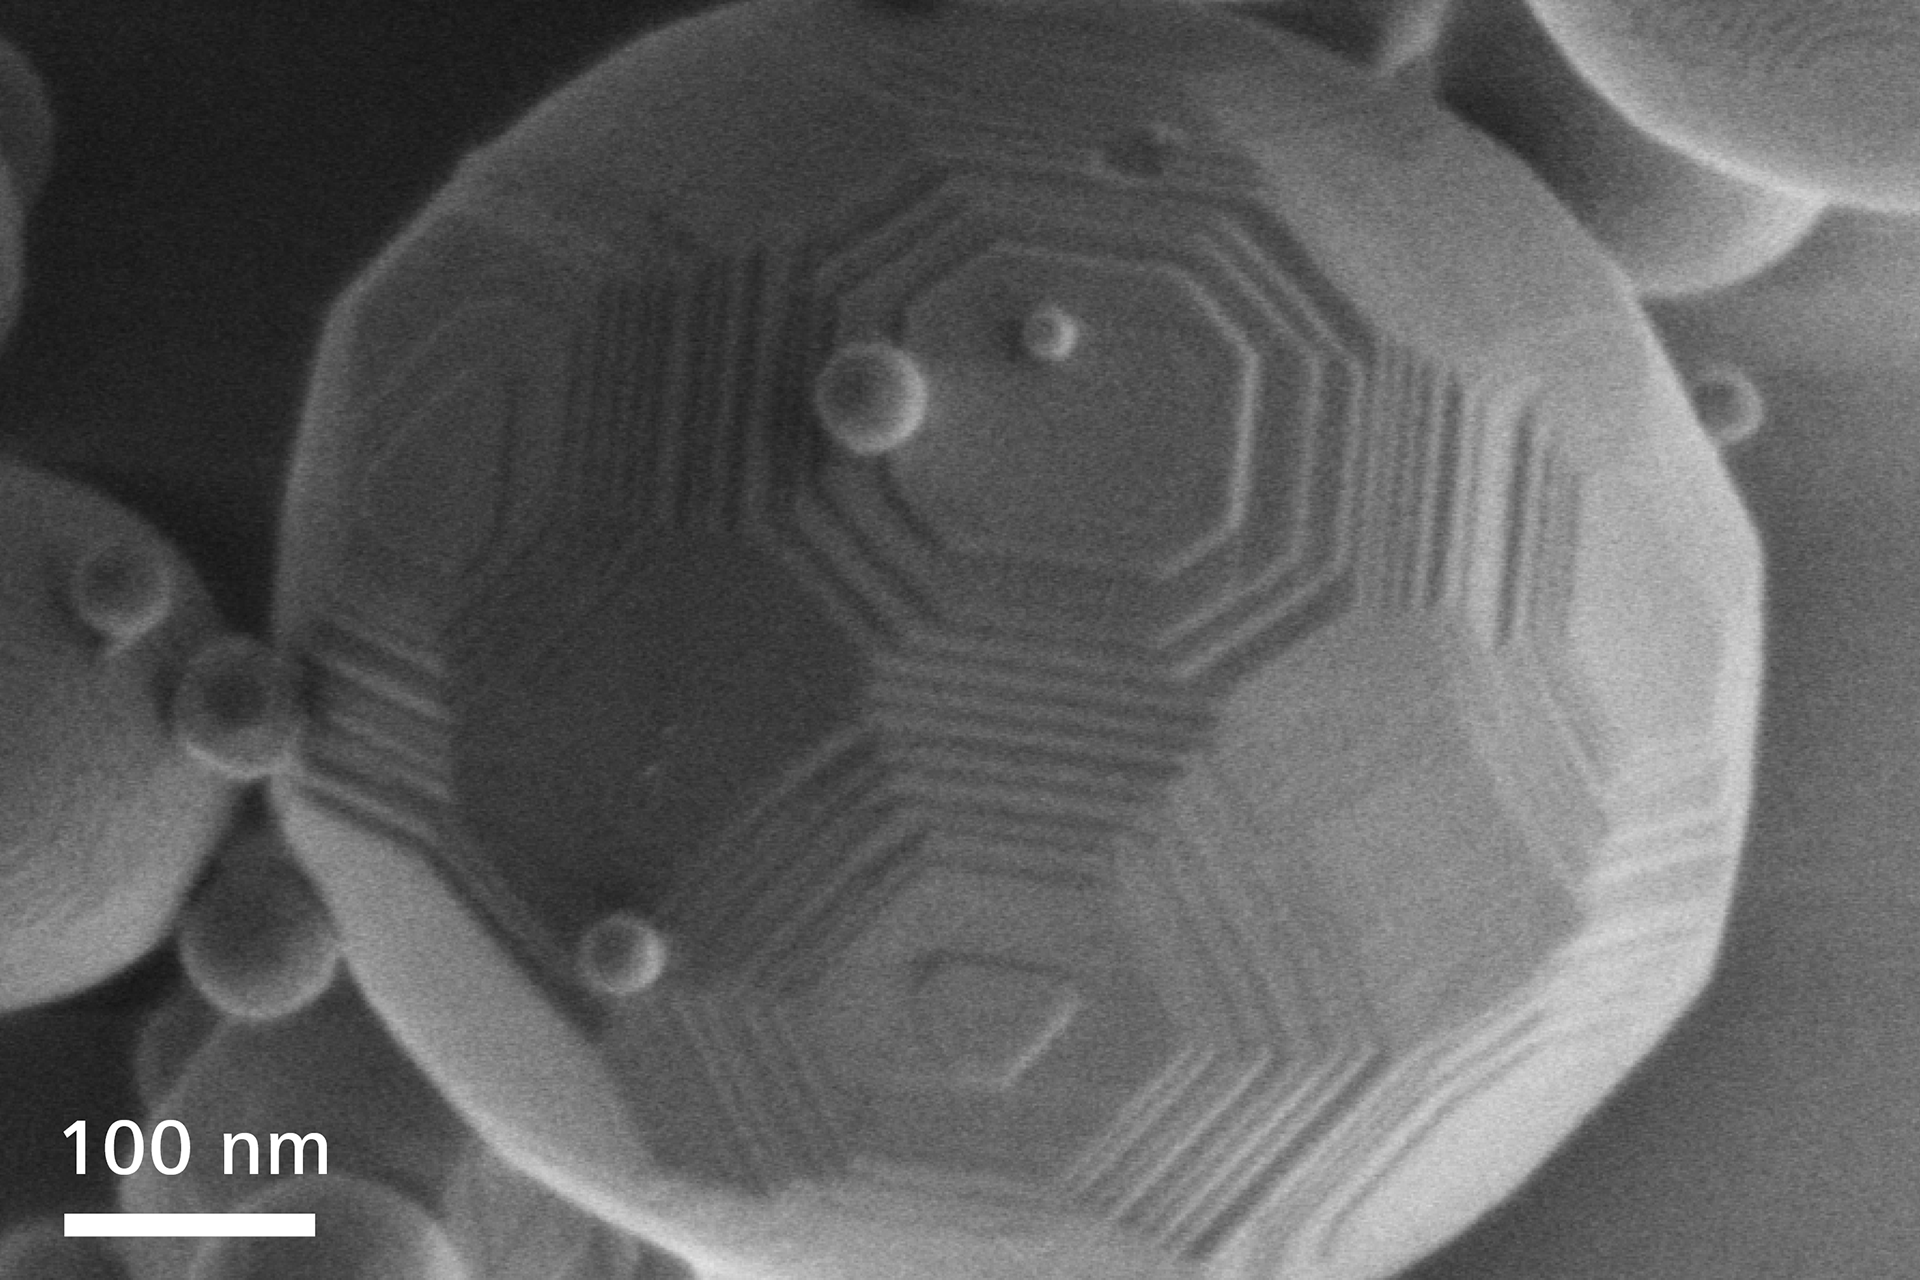 Al2O3 spheres. Terraces of sintered particles are visible under surface-sensitive imaging with high resolution at 500 V. Some distances between terraces are as small as 3 nm. Sigma 560, 500 V, Inlens SE.